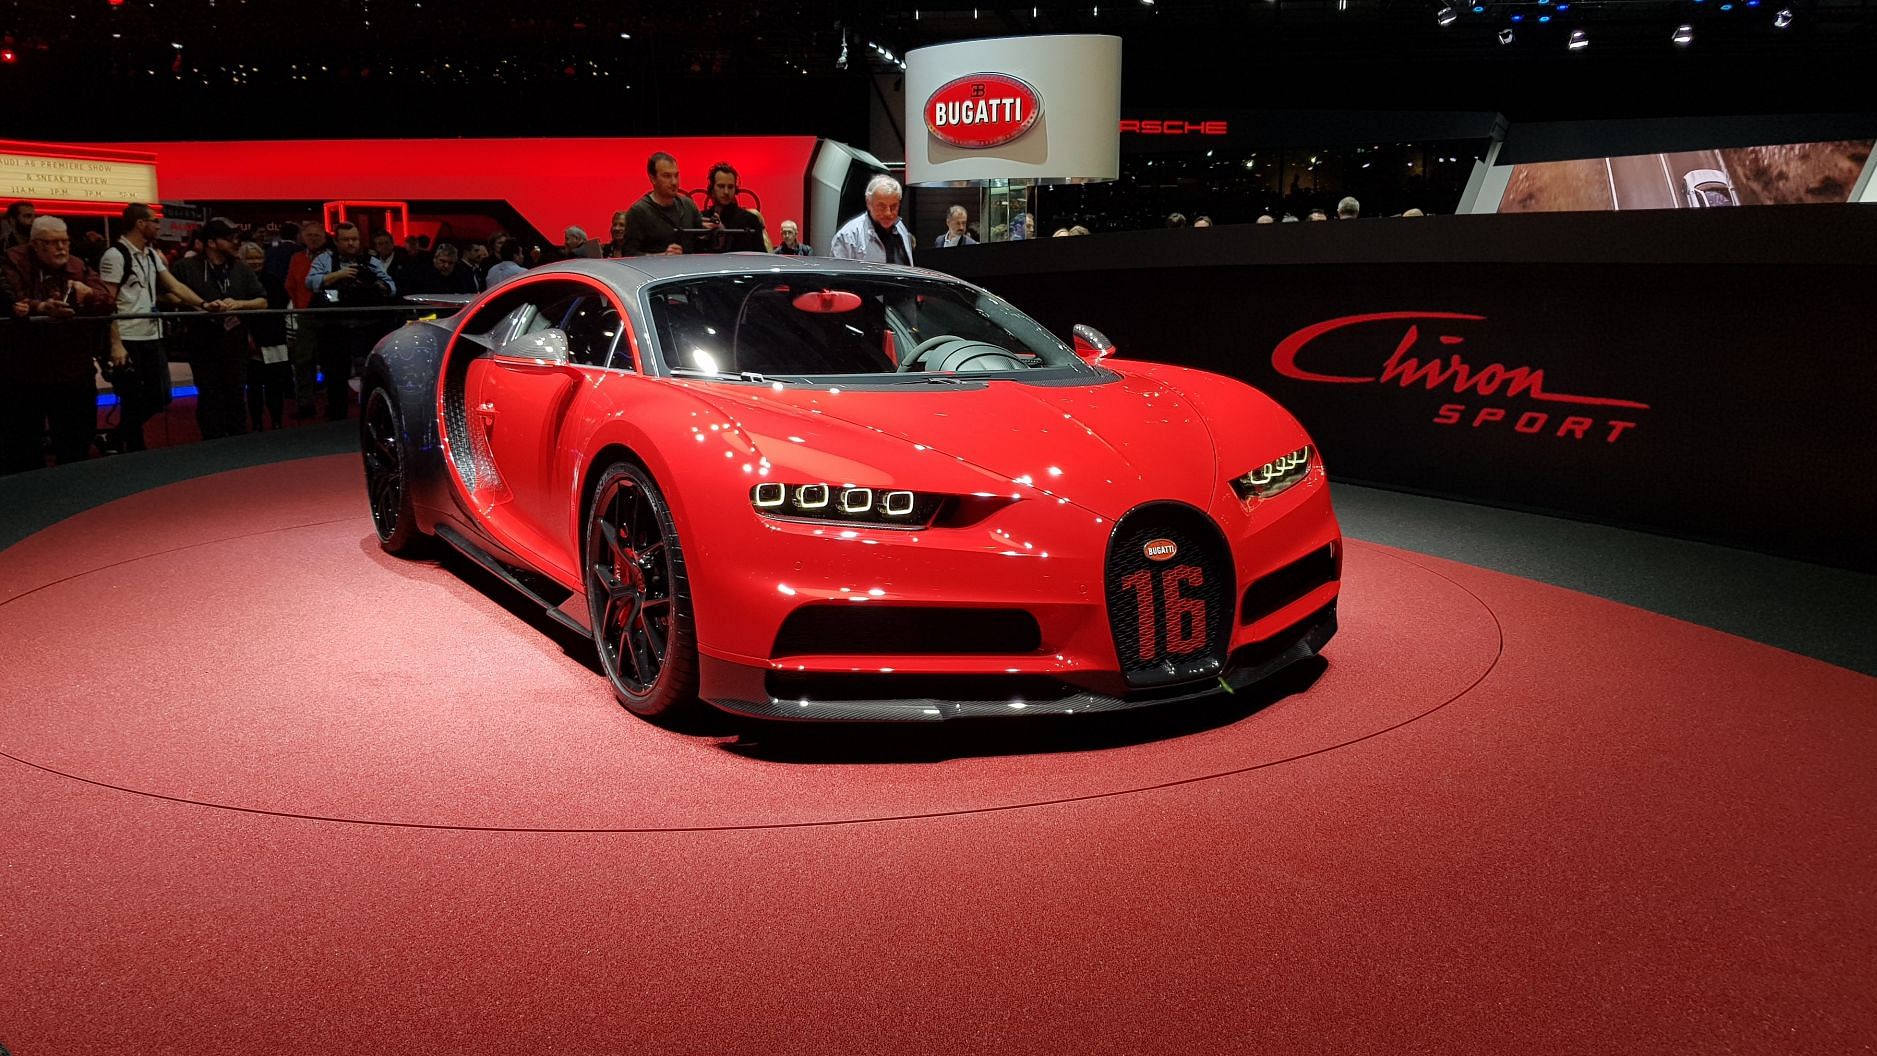 The Bugatti Chiron Sport is priced at $3.26 million.